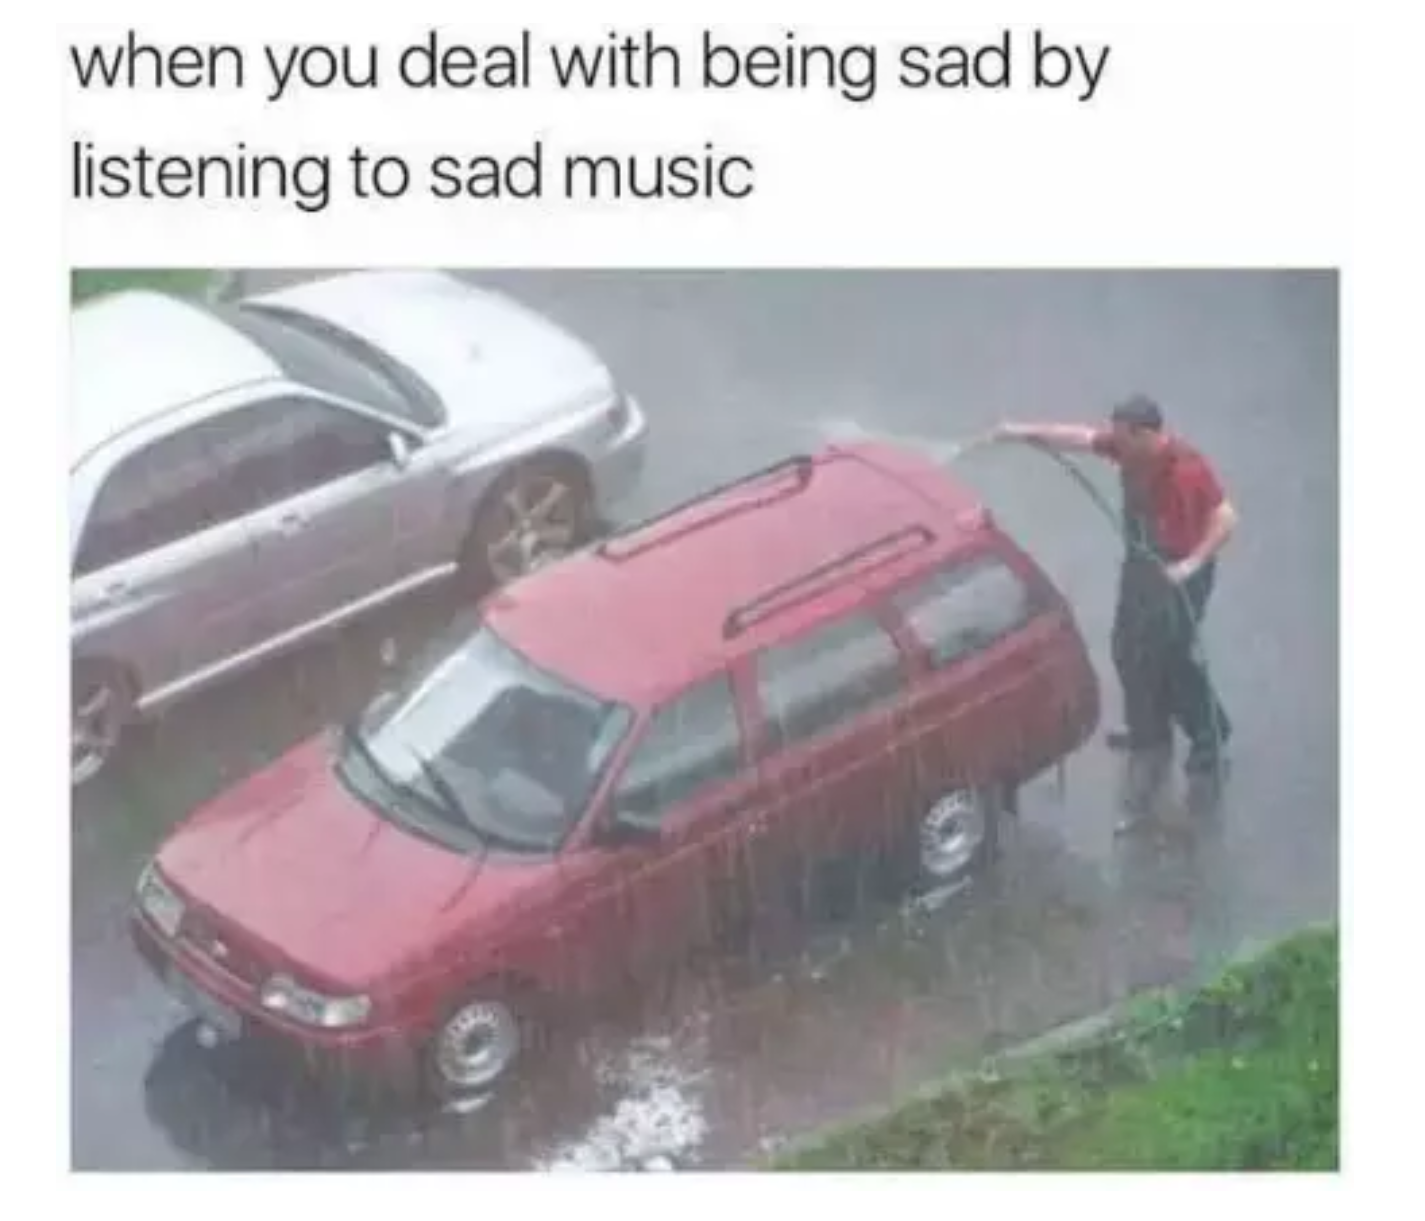 you deal with being sad by listening - when you deal with being sad by listening to sad music